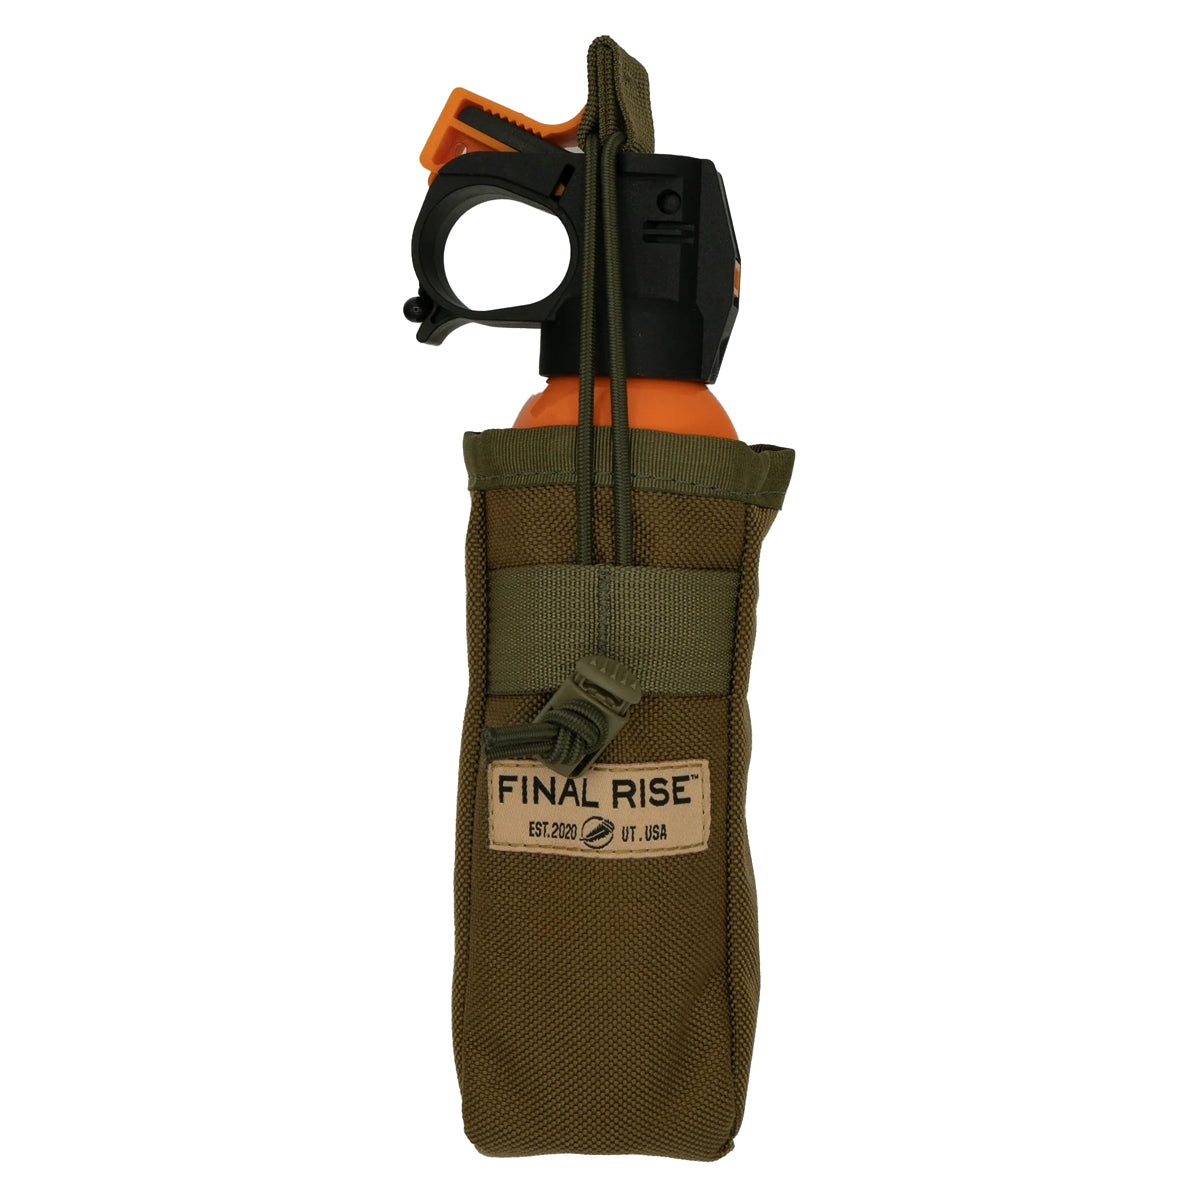 Final Rise Bear Spray Pouch in Brown by GOHUNT | Final Rise - GOHUNT Shop